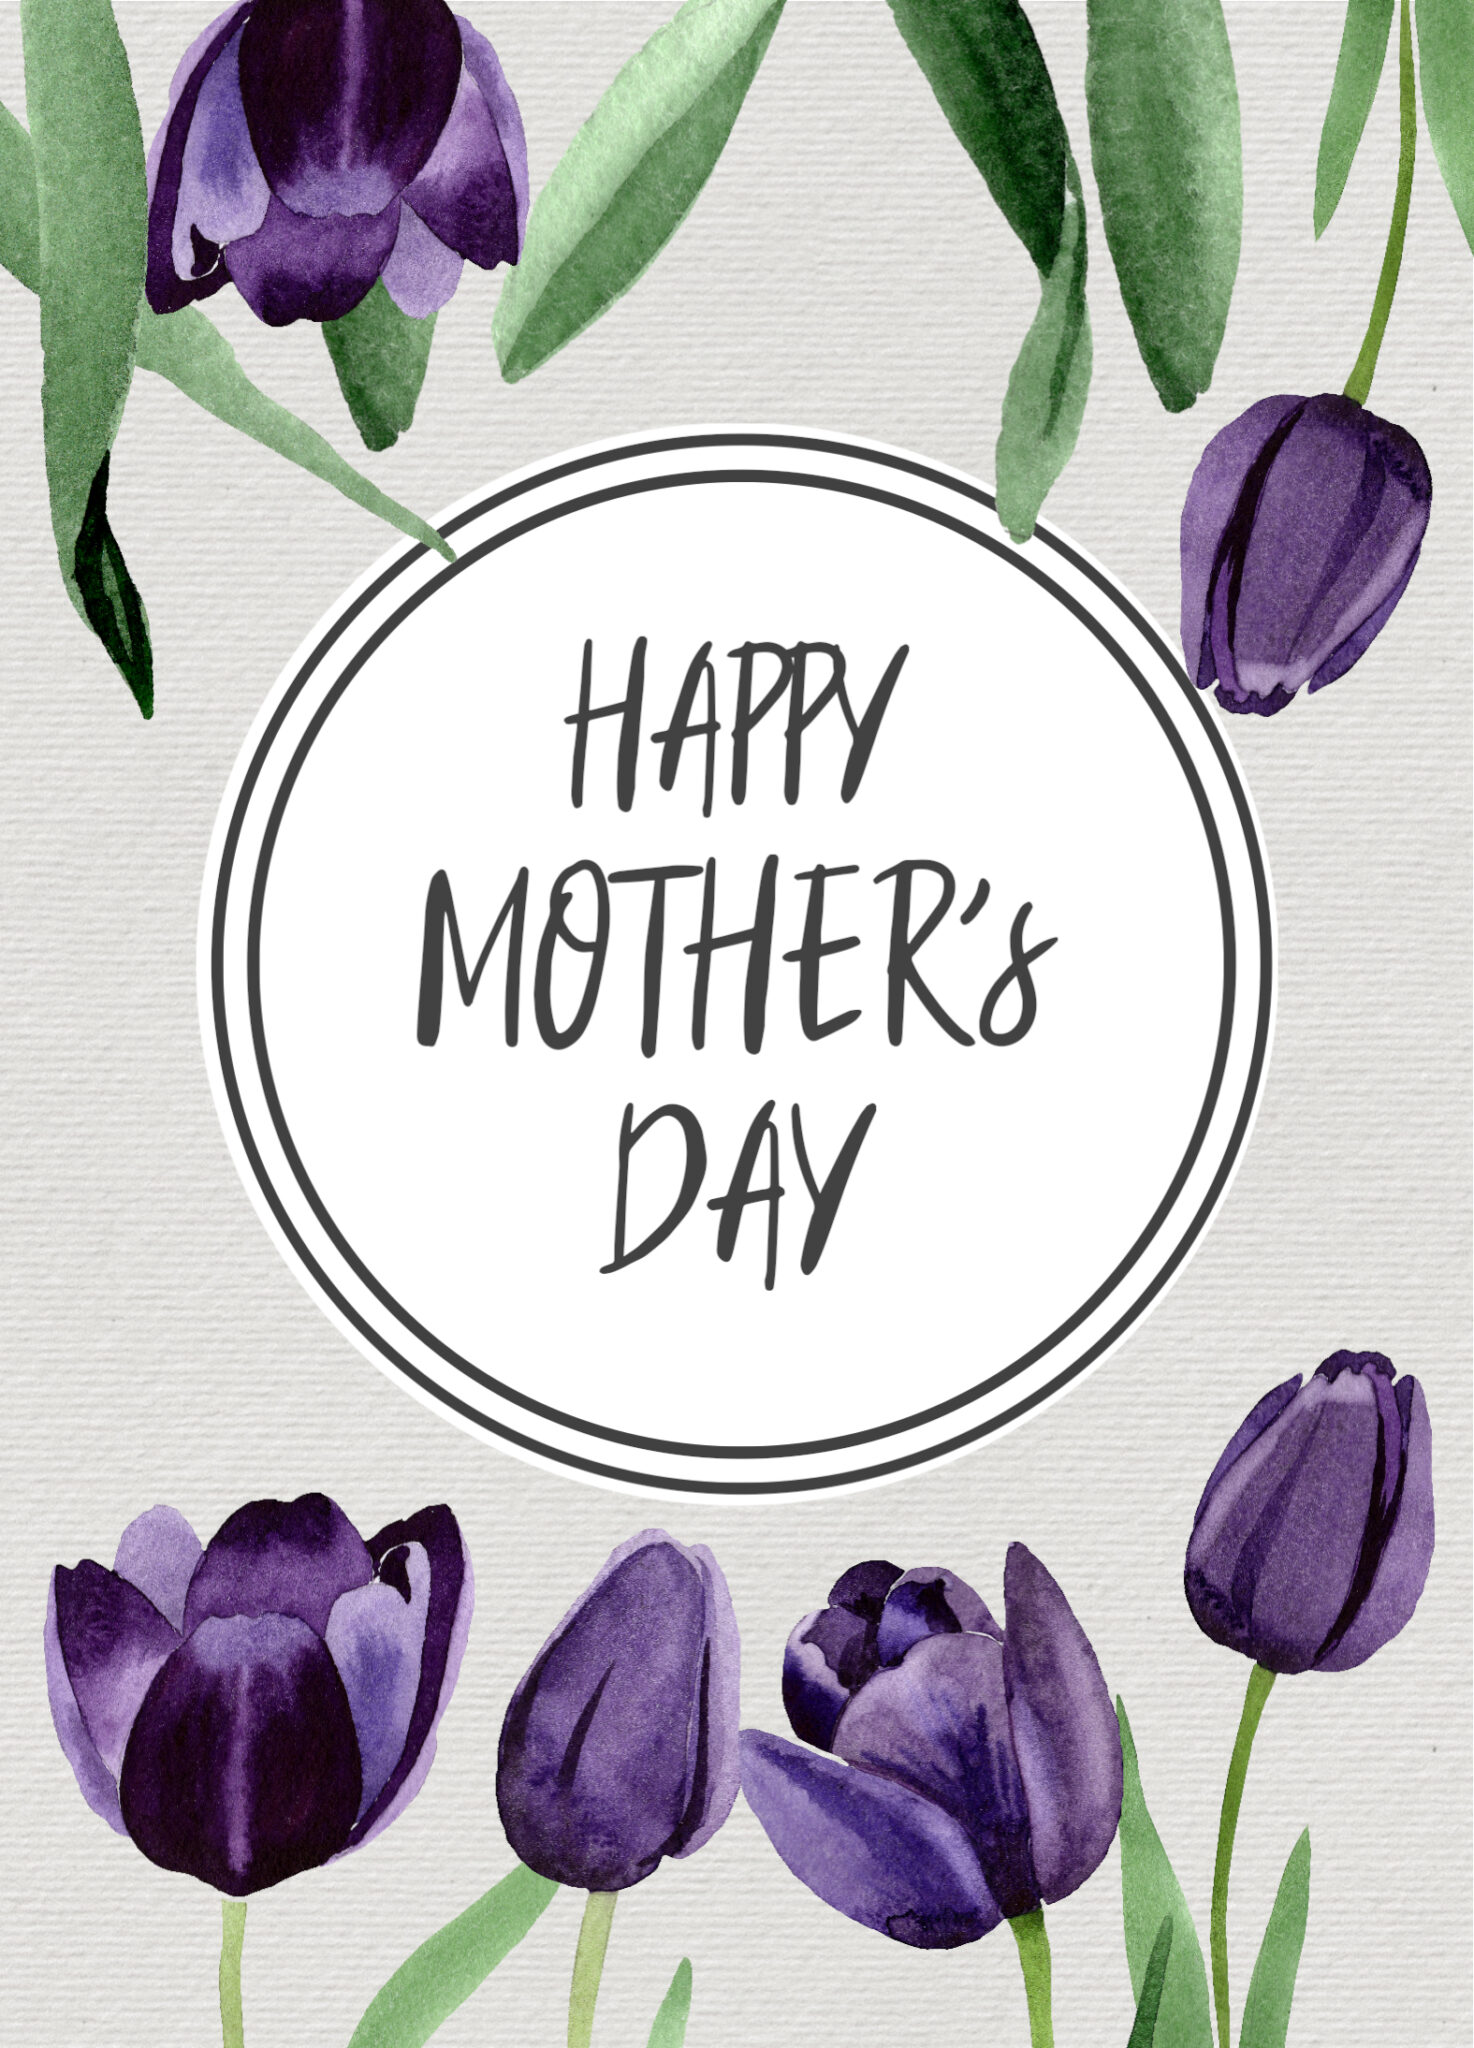 free-printable-mother-s-day-cards-paper-trail-design